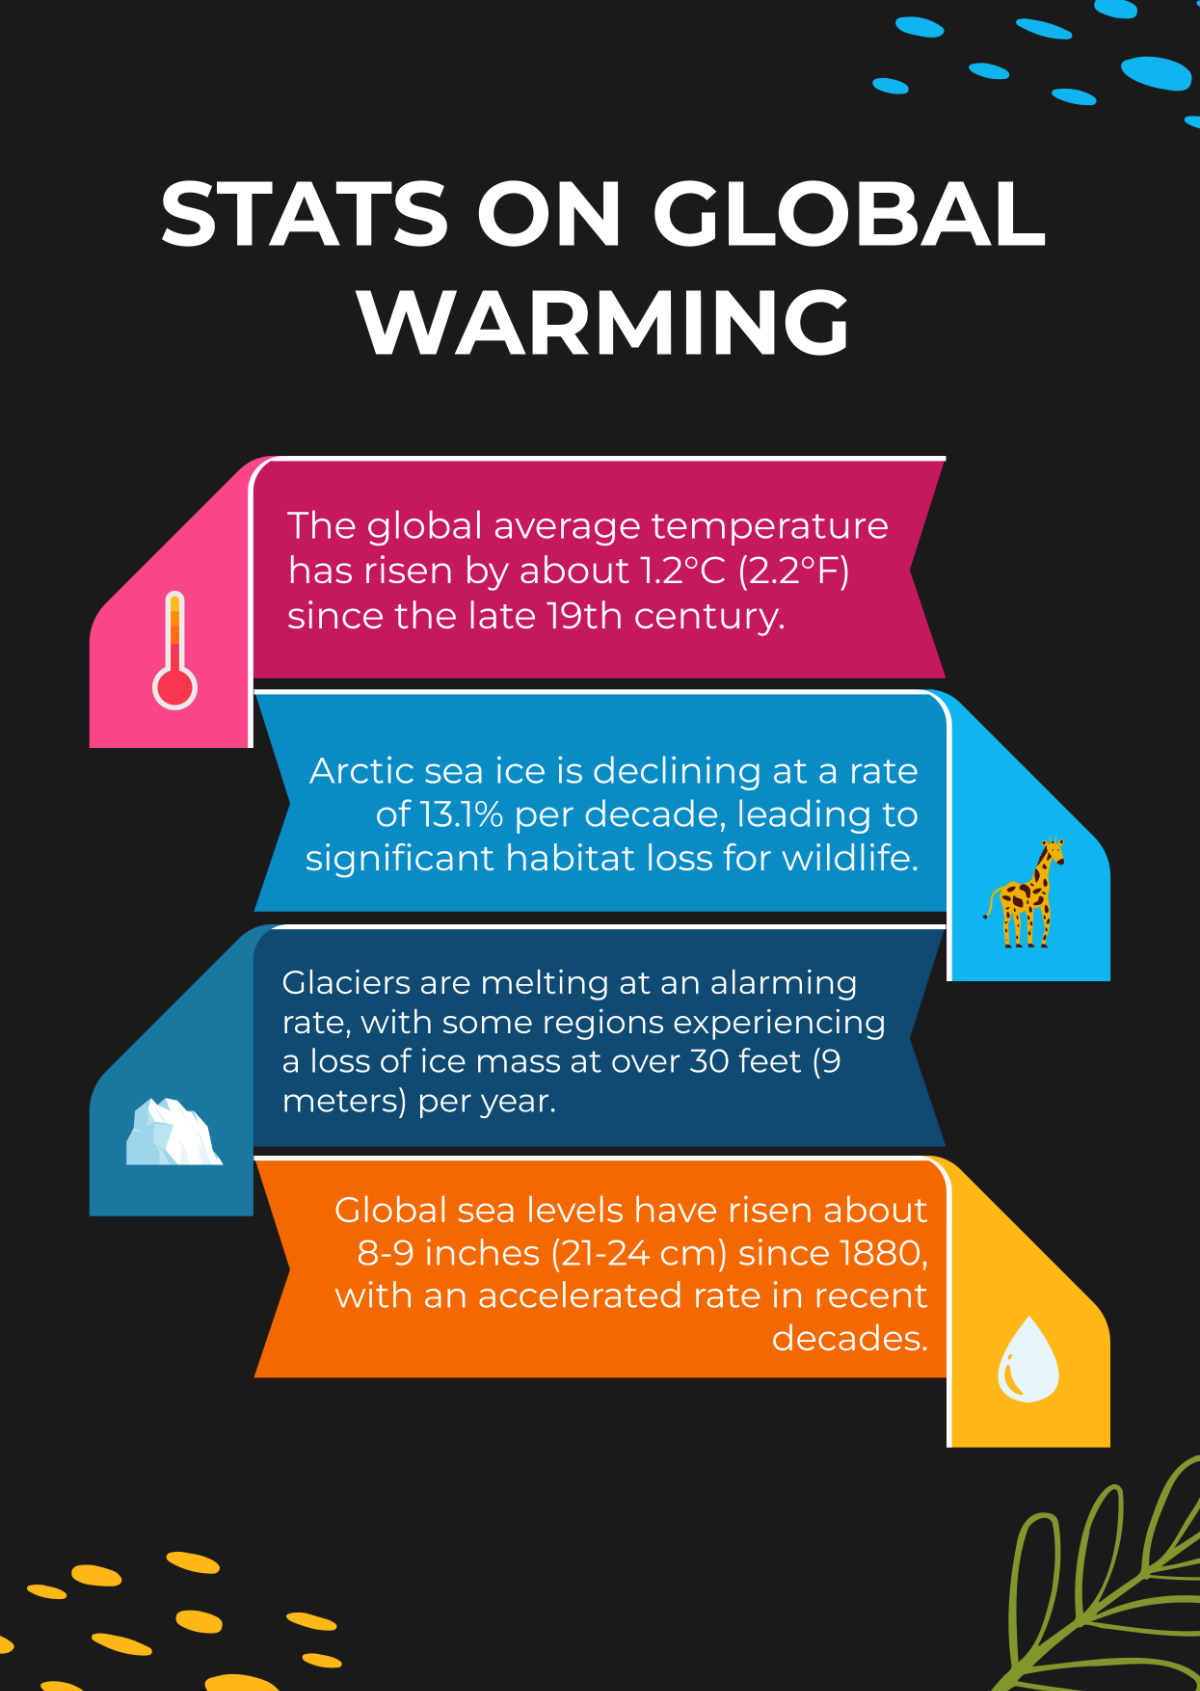 Free Global Warming Infographic Template